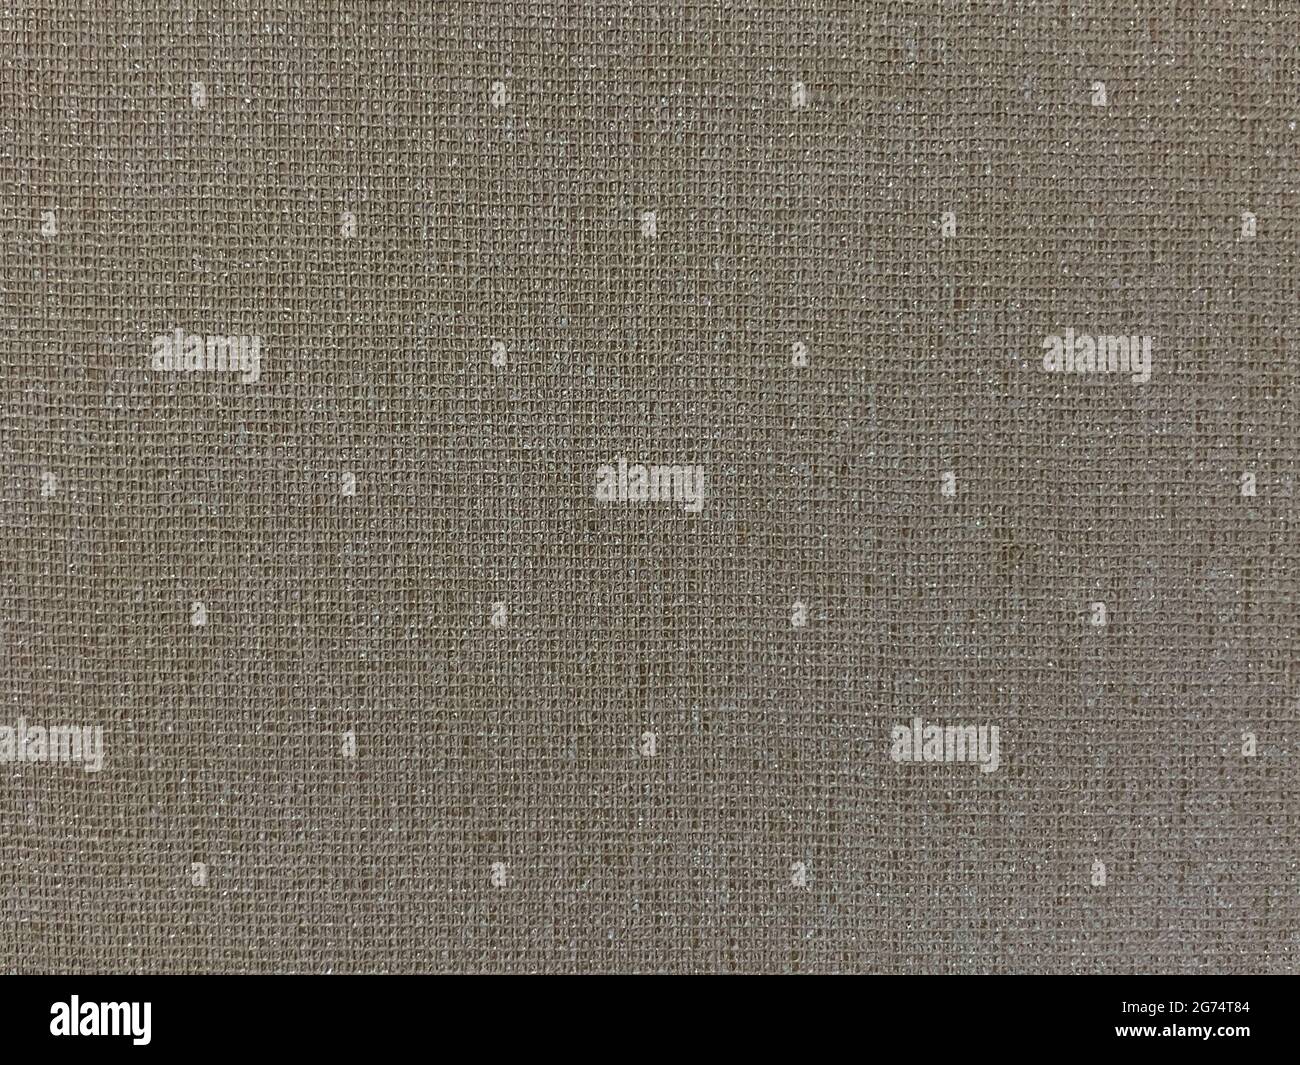 Linen-like paper texture background, real pattern Stock Photo - Alamy